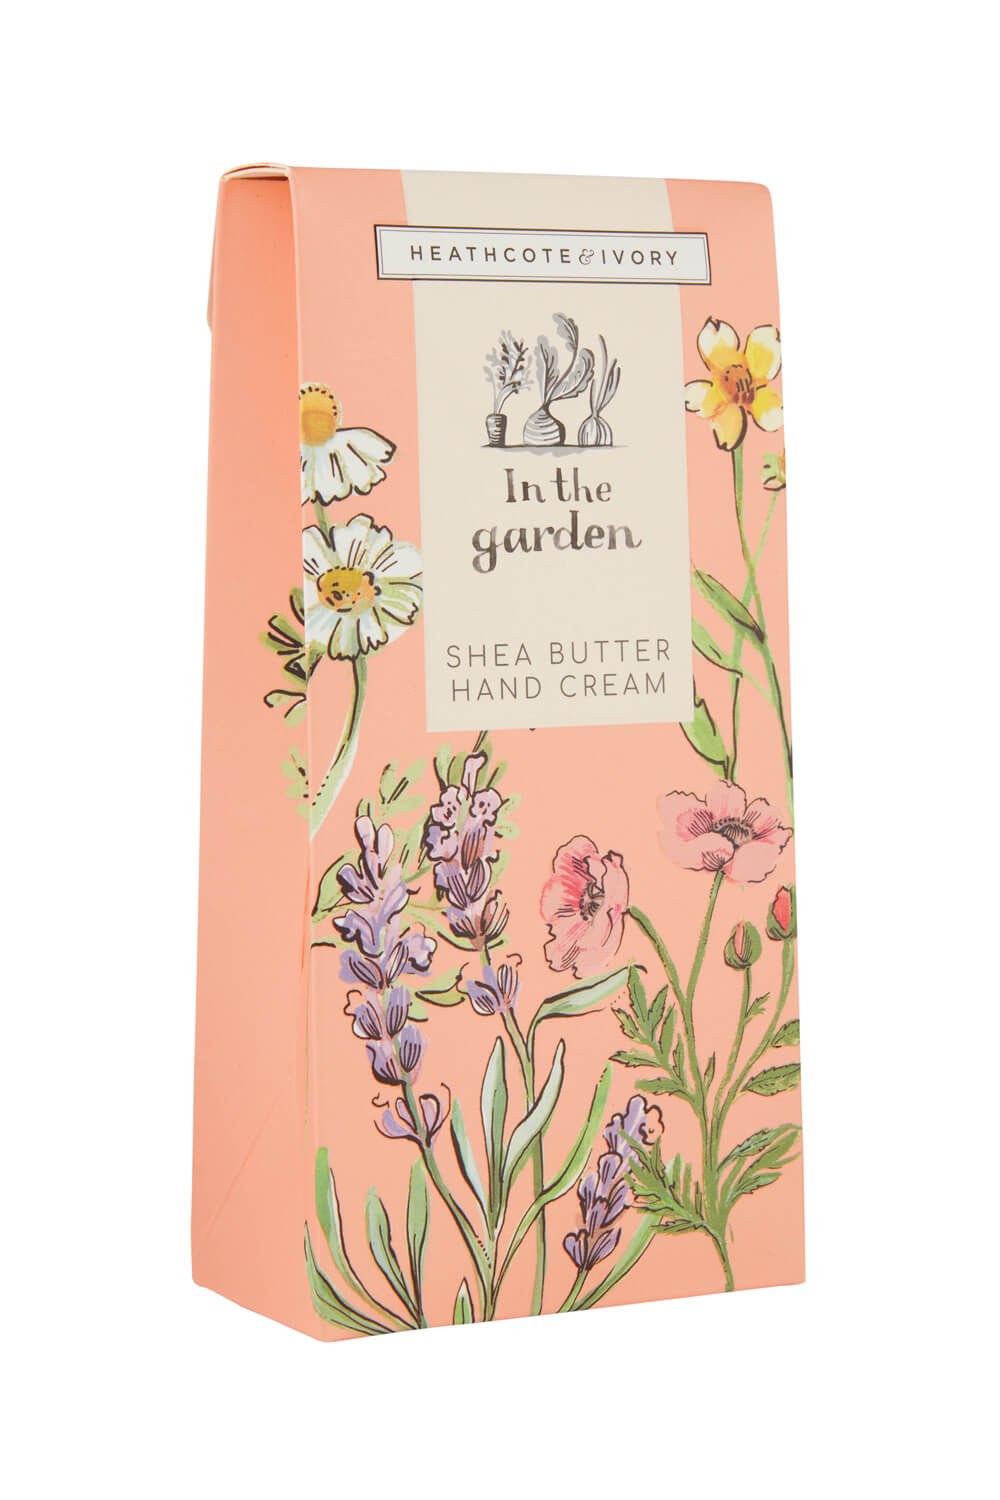  Heathcote & Ivory - In The Garden Shea Butter Hand Cream, Image 3 of 5